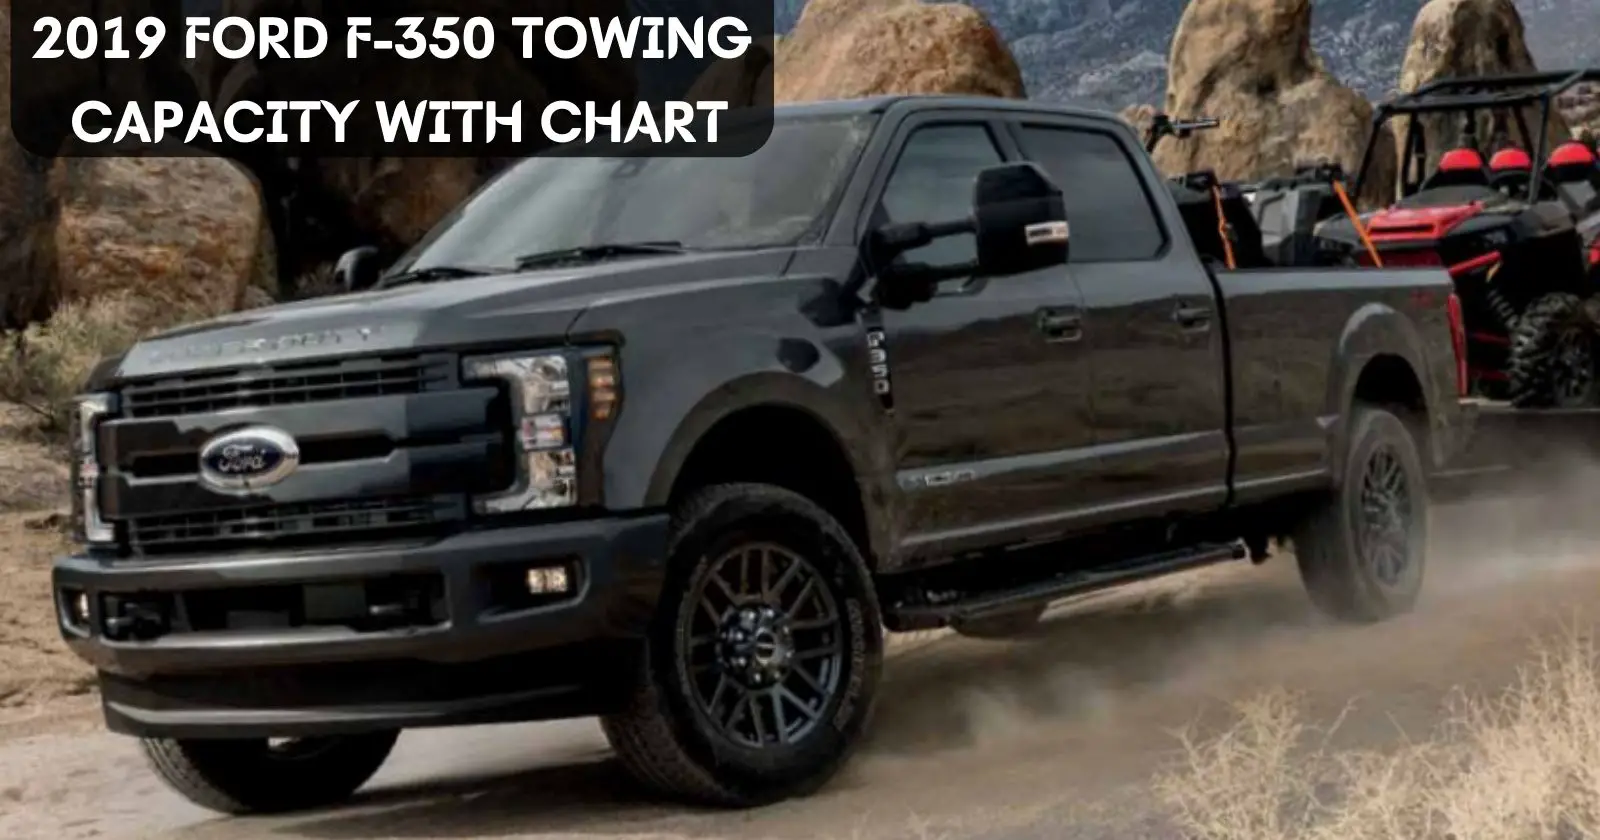 2019-ford-f-350-towing-capacity-with-chart-thecartowing